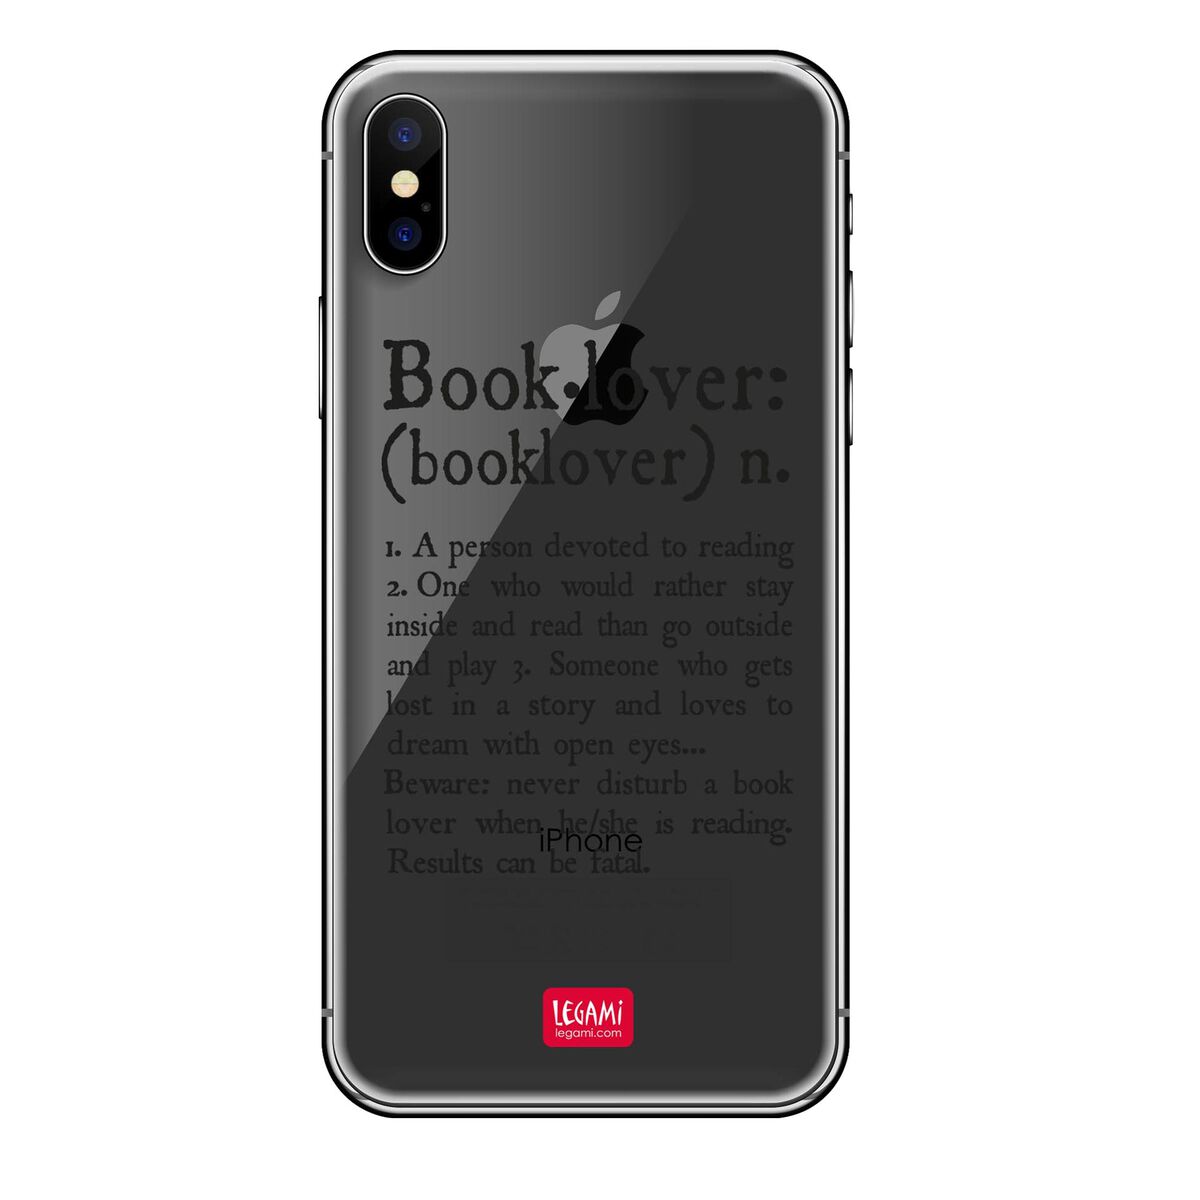 Clear Cover iPhone X, , zoo